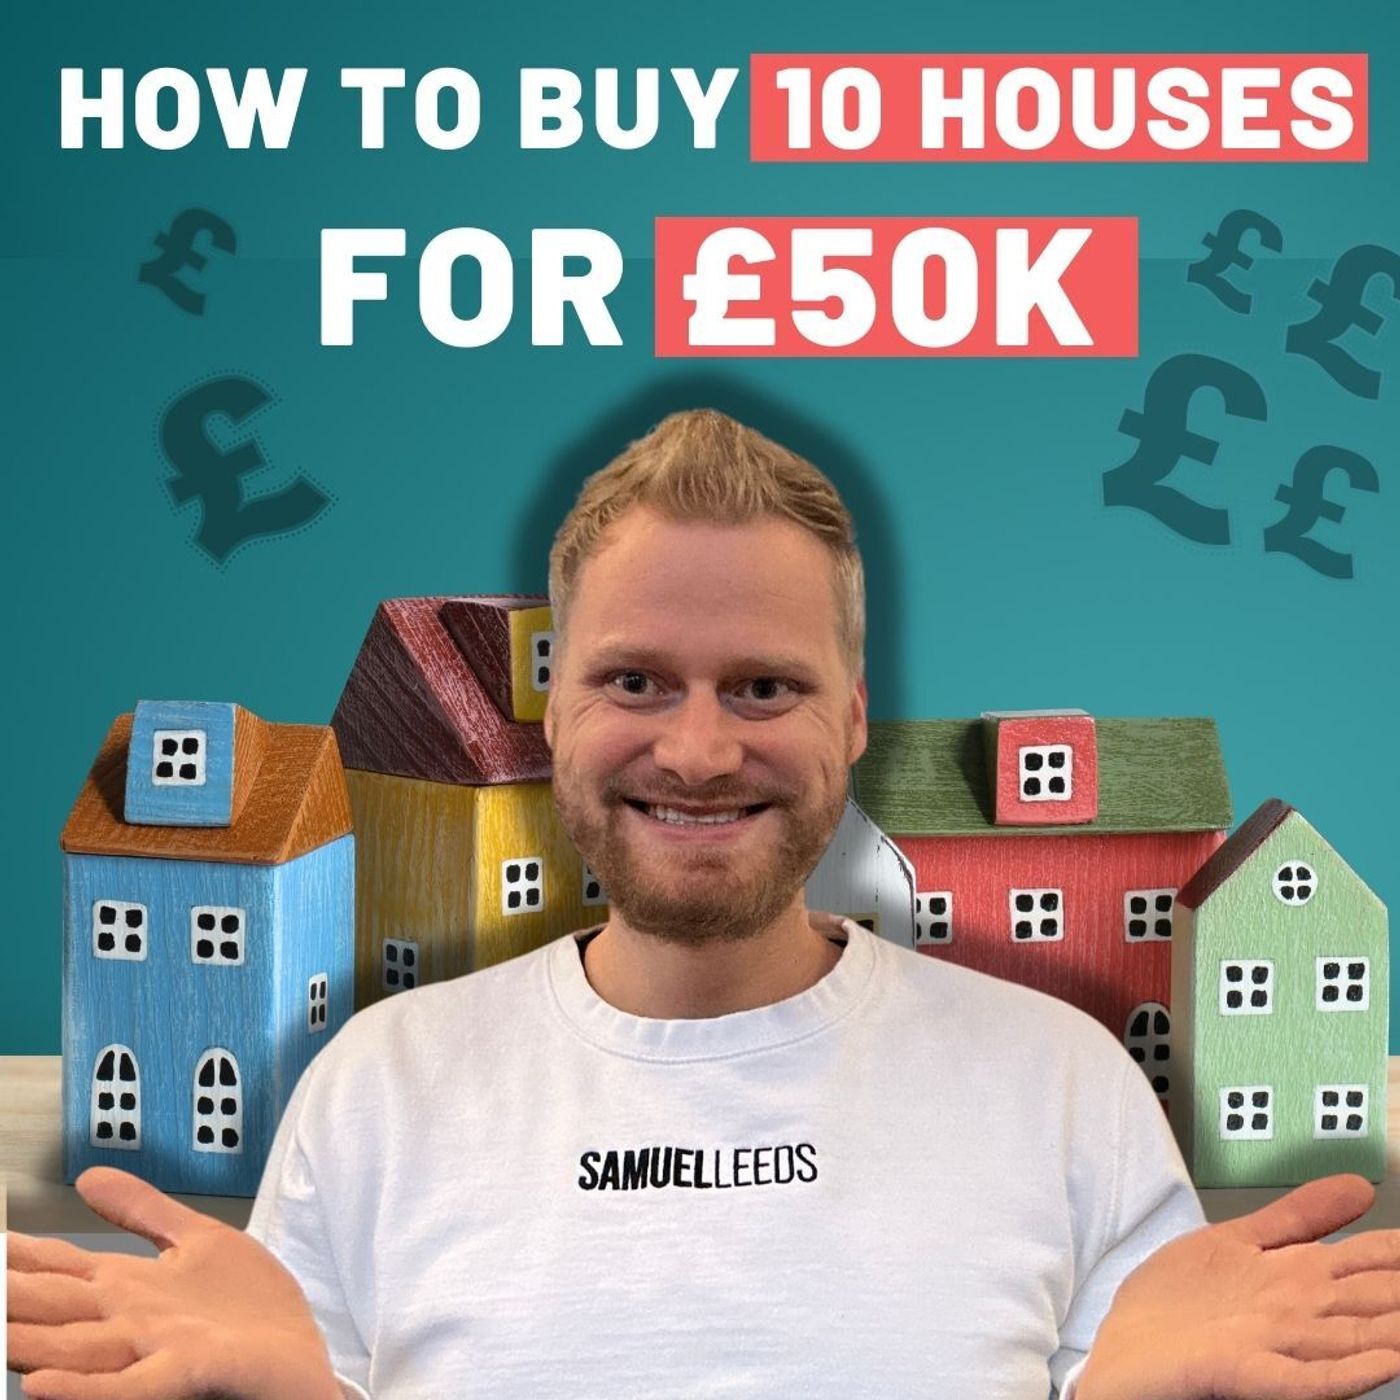 22: How to BUY 10 houses for £50K!